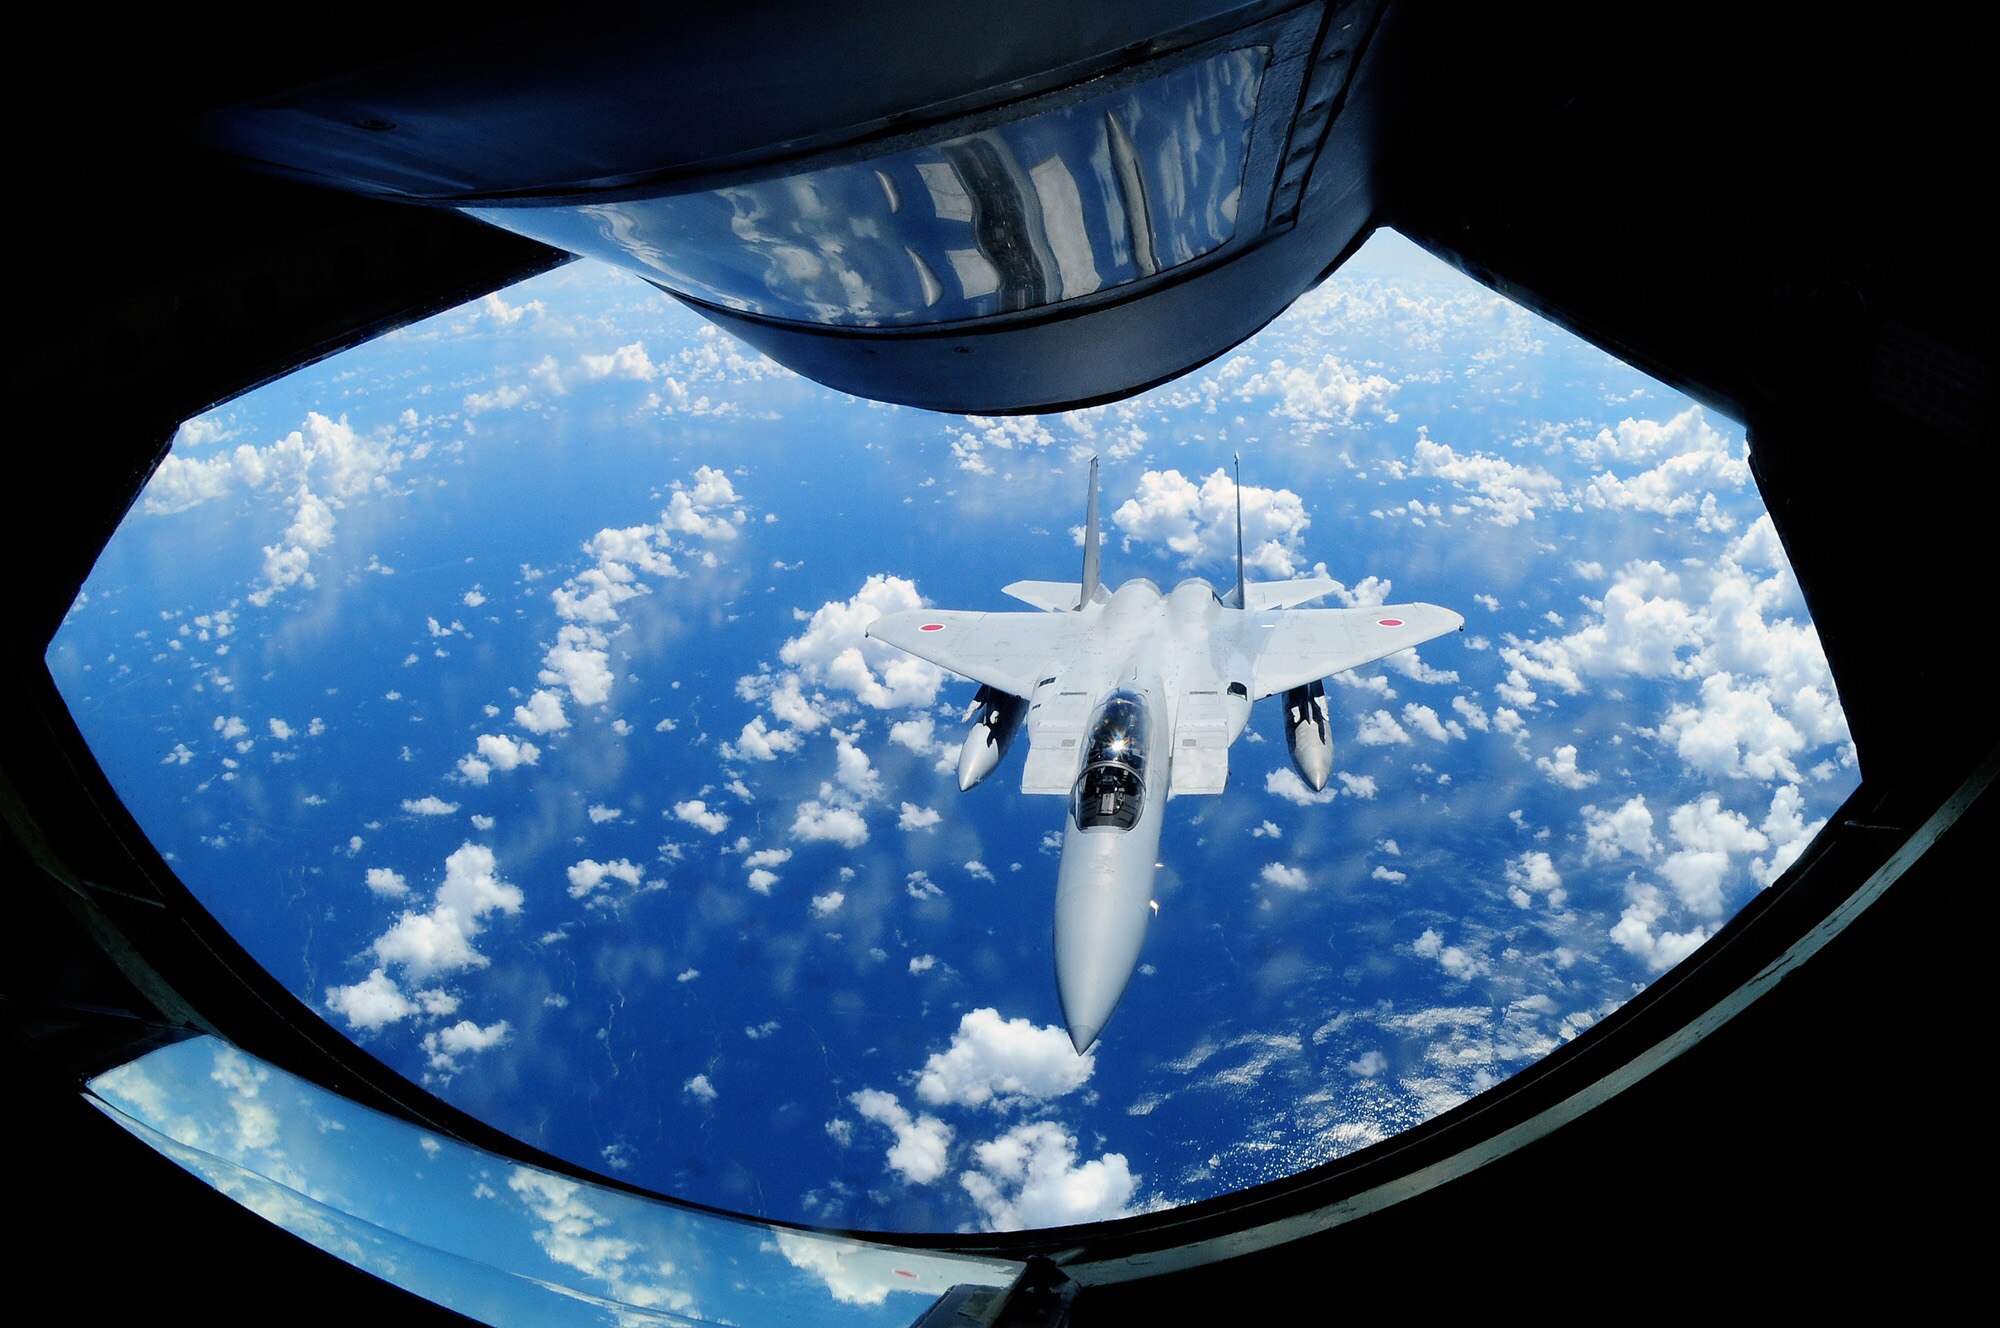 A Japan Air Self Defense Force F-15 is refueled by a U.S. Air Force KC-135 from the 909th Air Refueling Squadron, Kadena Air Base, during air refueling training July 30. The training is in preparation for JASDF participation in Red Flag Alaska this year.
(U.S. Air Force photo/Tech. Sgt. Angelique Perez) 